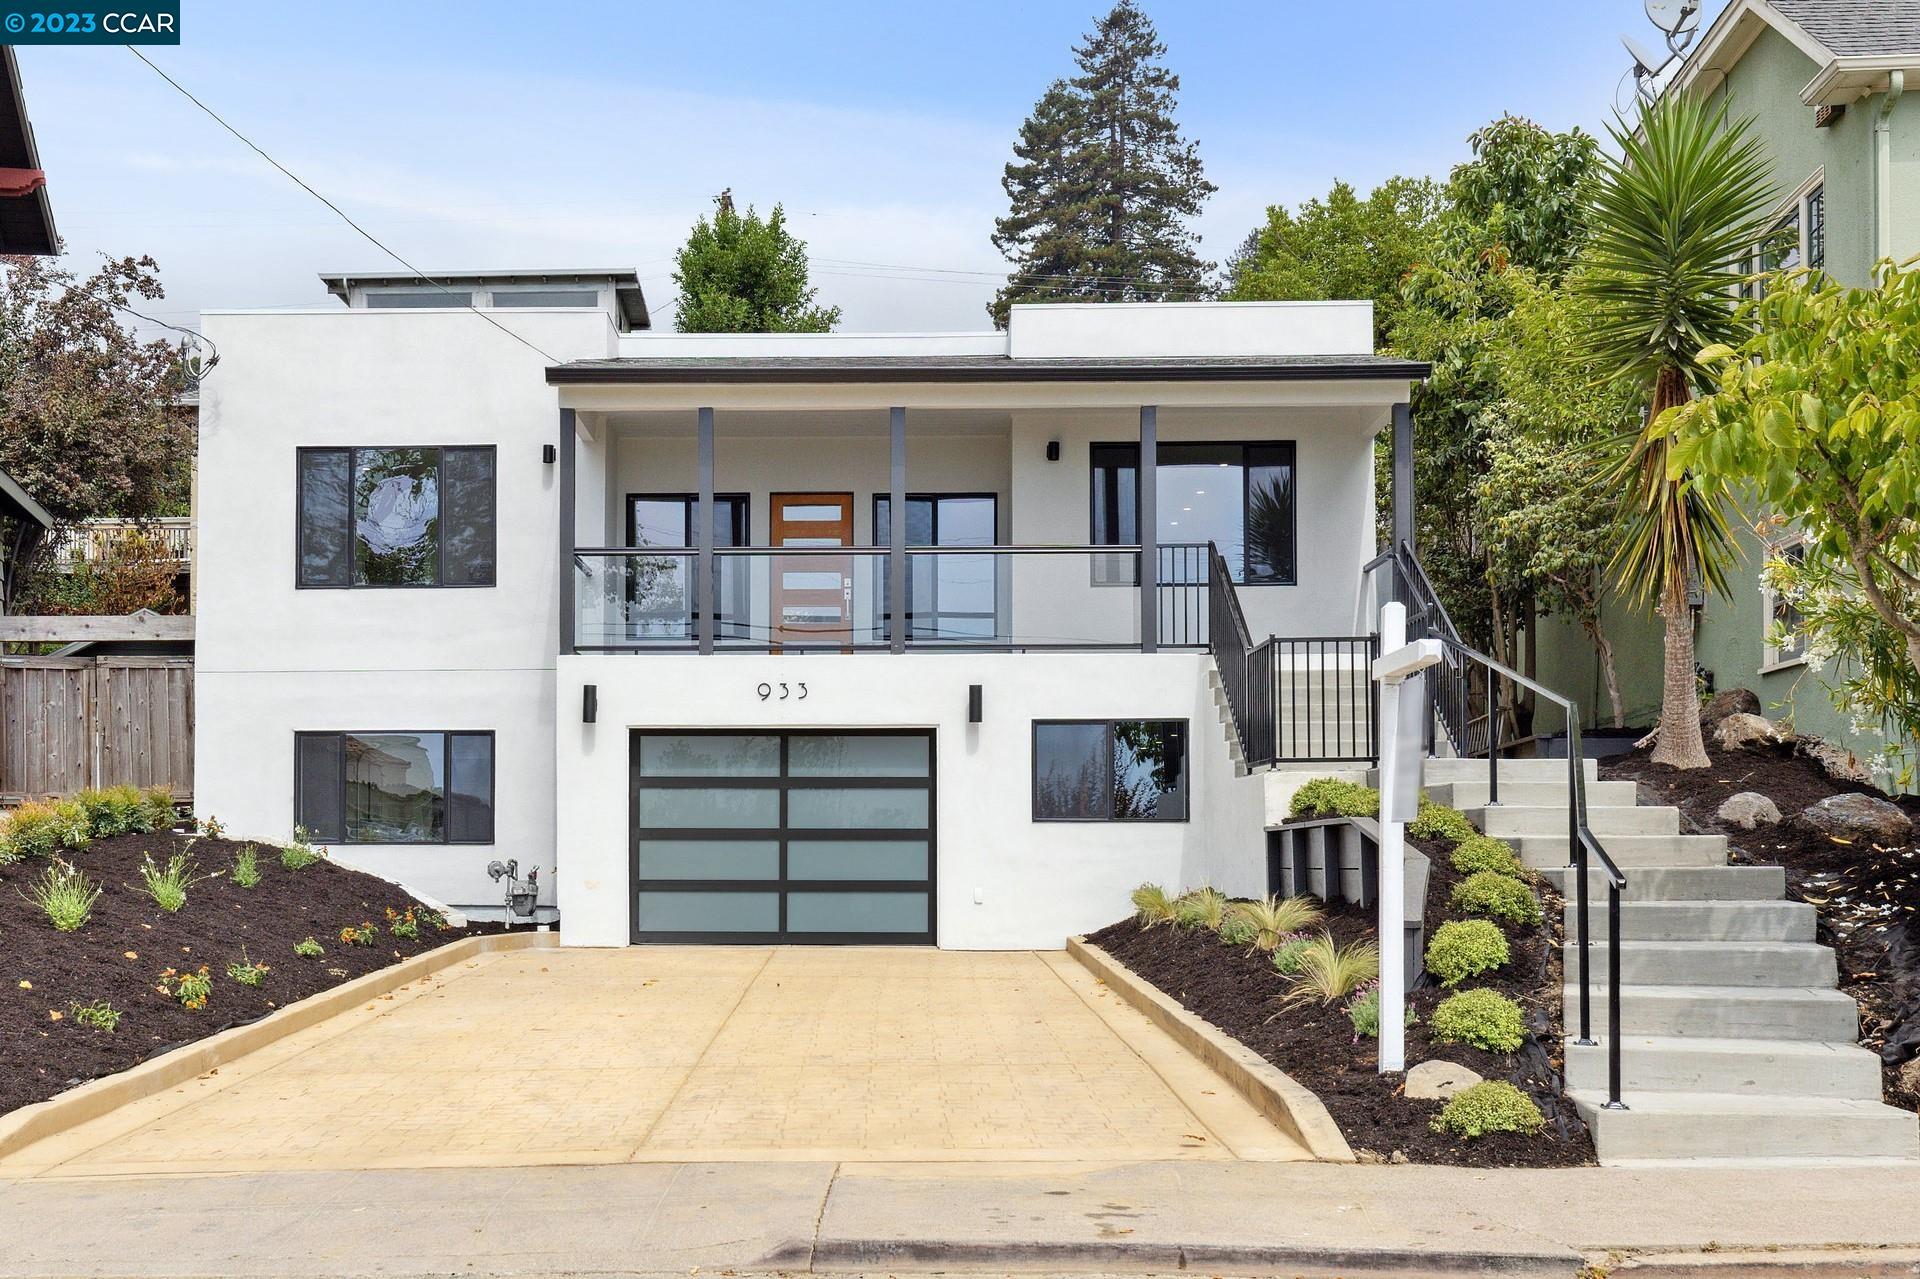 This impressive home, completely renovated from the ground up, awaits its new owner! With four bedrooms, four bathrooms, two living spaces and an additional flex space, this 2,952 square foot home offers abundant room for luxurious living complete with a view of San Francisco. The comprehensive renovation, involving a meticulous rebuild from the studs out, includes a 10-year builder warranty on its newly engineered foundation, structural framing and waterproofing ensuring the home’s longevity. Every aspect of this home has been carefully considered to offer both comfort and functionality, making it a truly exceptional living space for any buyer. Two of the bedrooms are on-suites, one on each floor. All the modern design bathrooms have Grohe fixtures and Toto Water Saving toilets. The gorgeous kitchen is equipped with high quality Miele appliances, including a large refrigerator, dishwasher, built-in microwave and espresso maker, a 6-burner gas stove with griddle, and double oven will make cooking a dream! The downstairs family room has beautiful built-ins, complete with a beverage fridge, adding substantial comfort and convenience to the living space. This home is a masterpiece of modern luxury living, ready to provide an unparalleled living experience for its future owner.